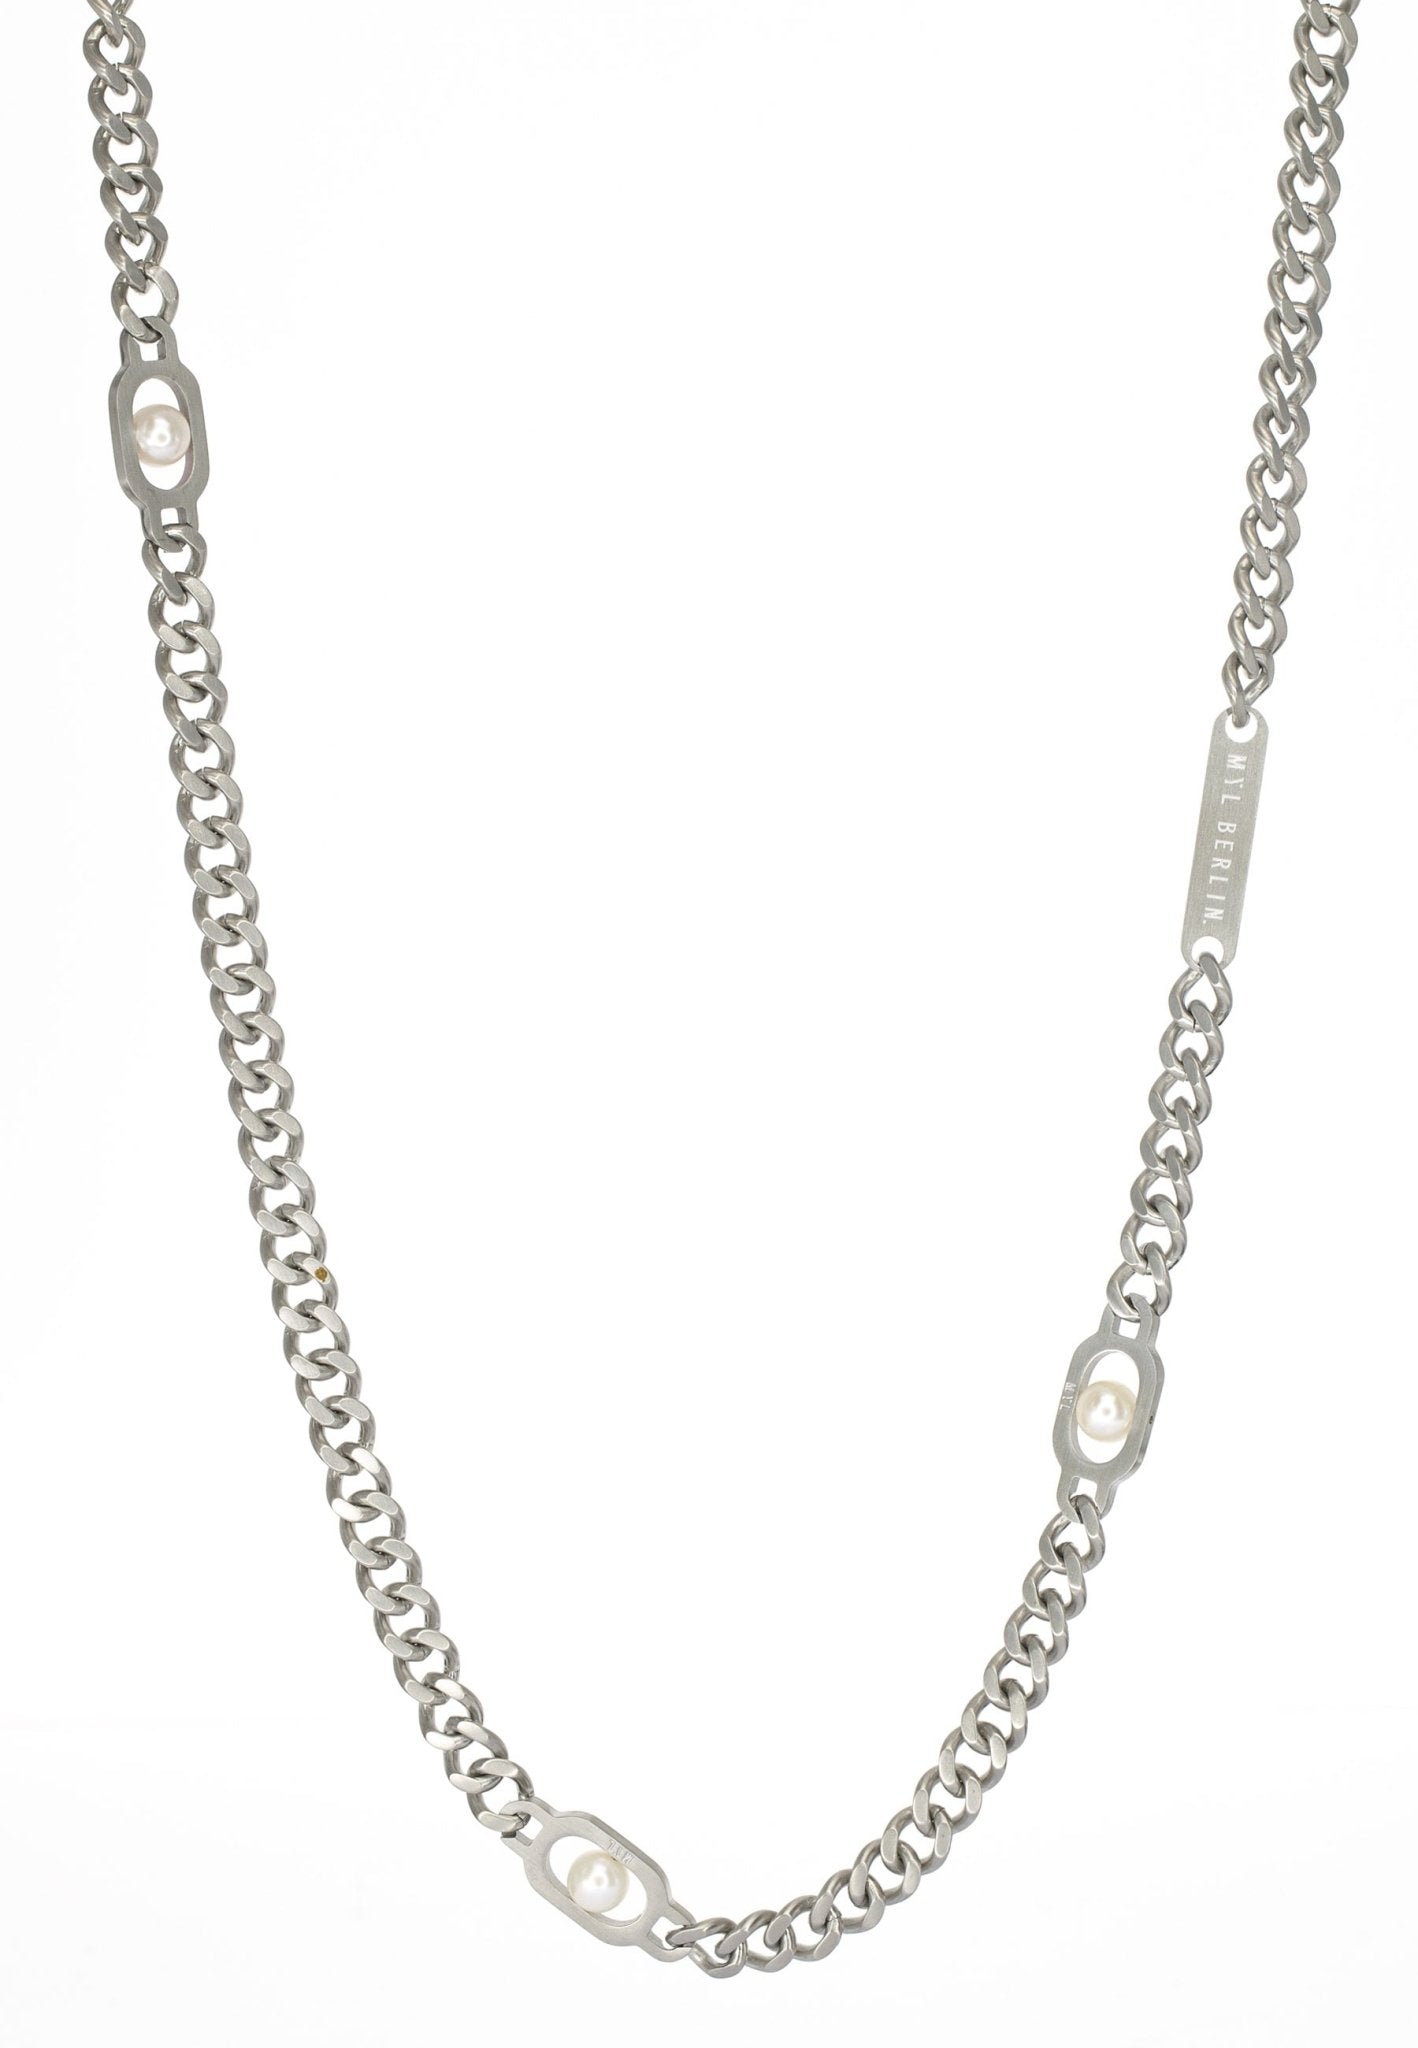 Thick Curb Chain Pearl Necklace - MYL BERLIN - 4260654111194 - 4260654111194